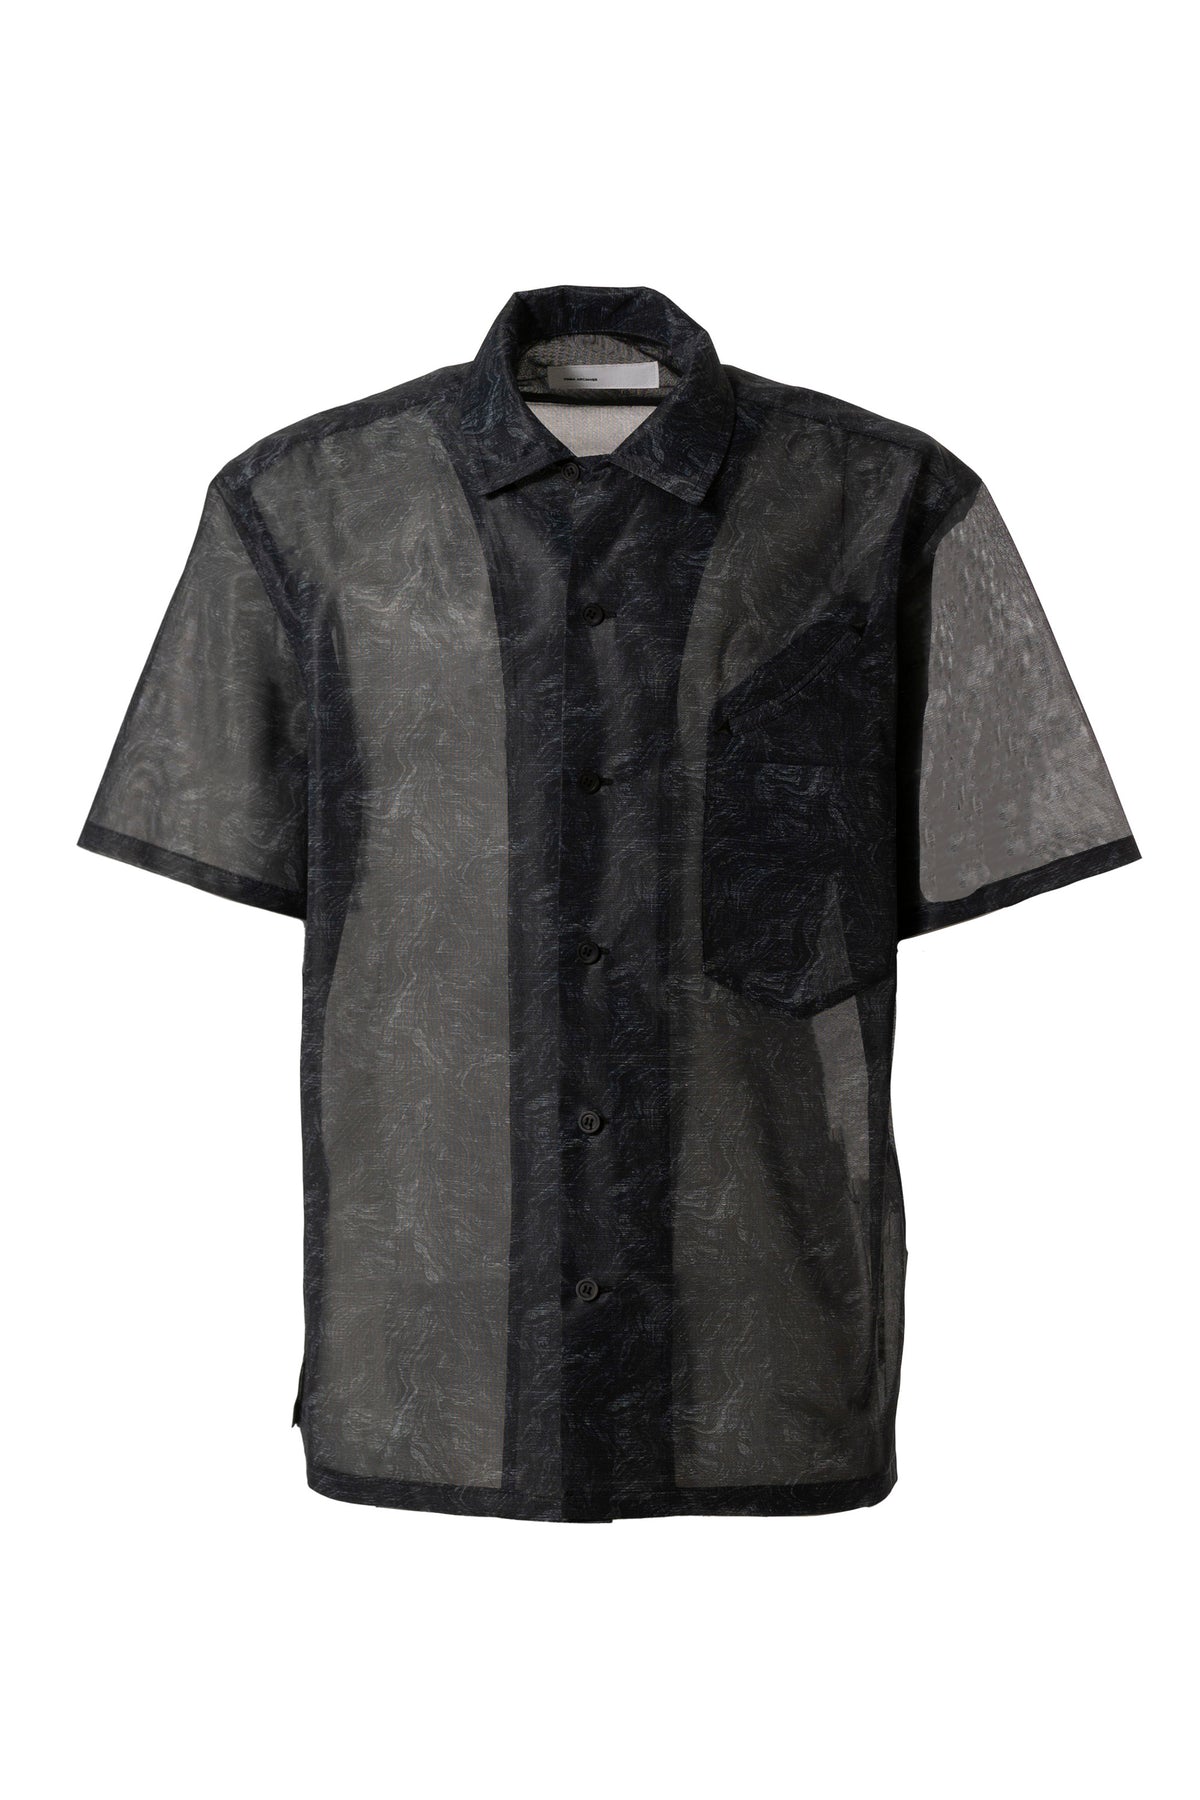 TOGA ARCHIVES MESH MARBLE PRINT S/S SHIRT / BLK